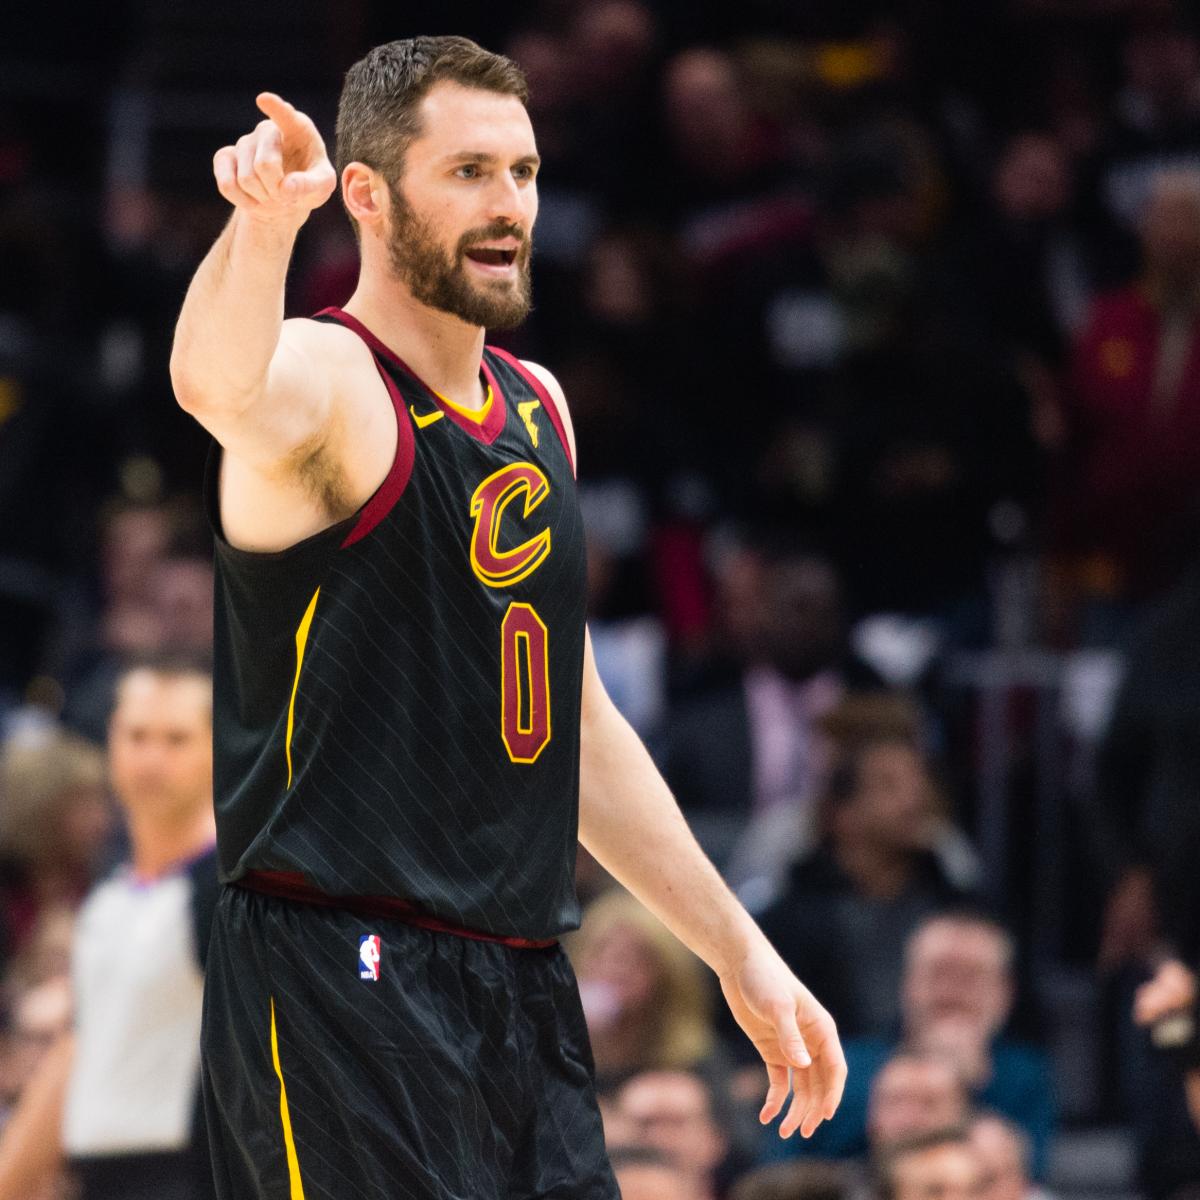 Cleveland Cavaliers hope to trade Kevin Love this offseason, per report 